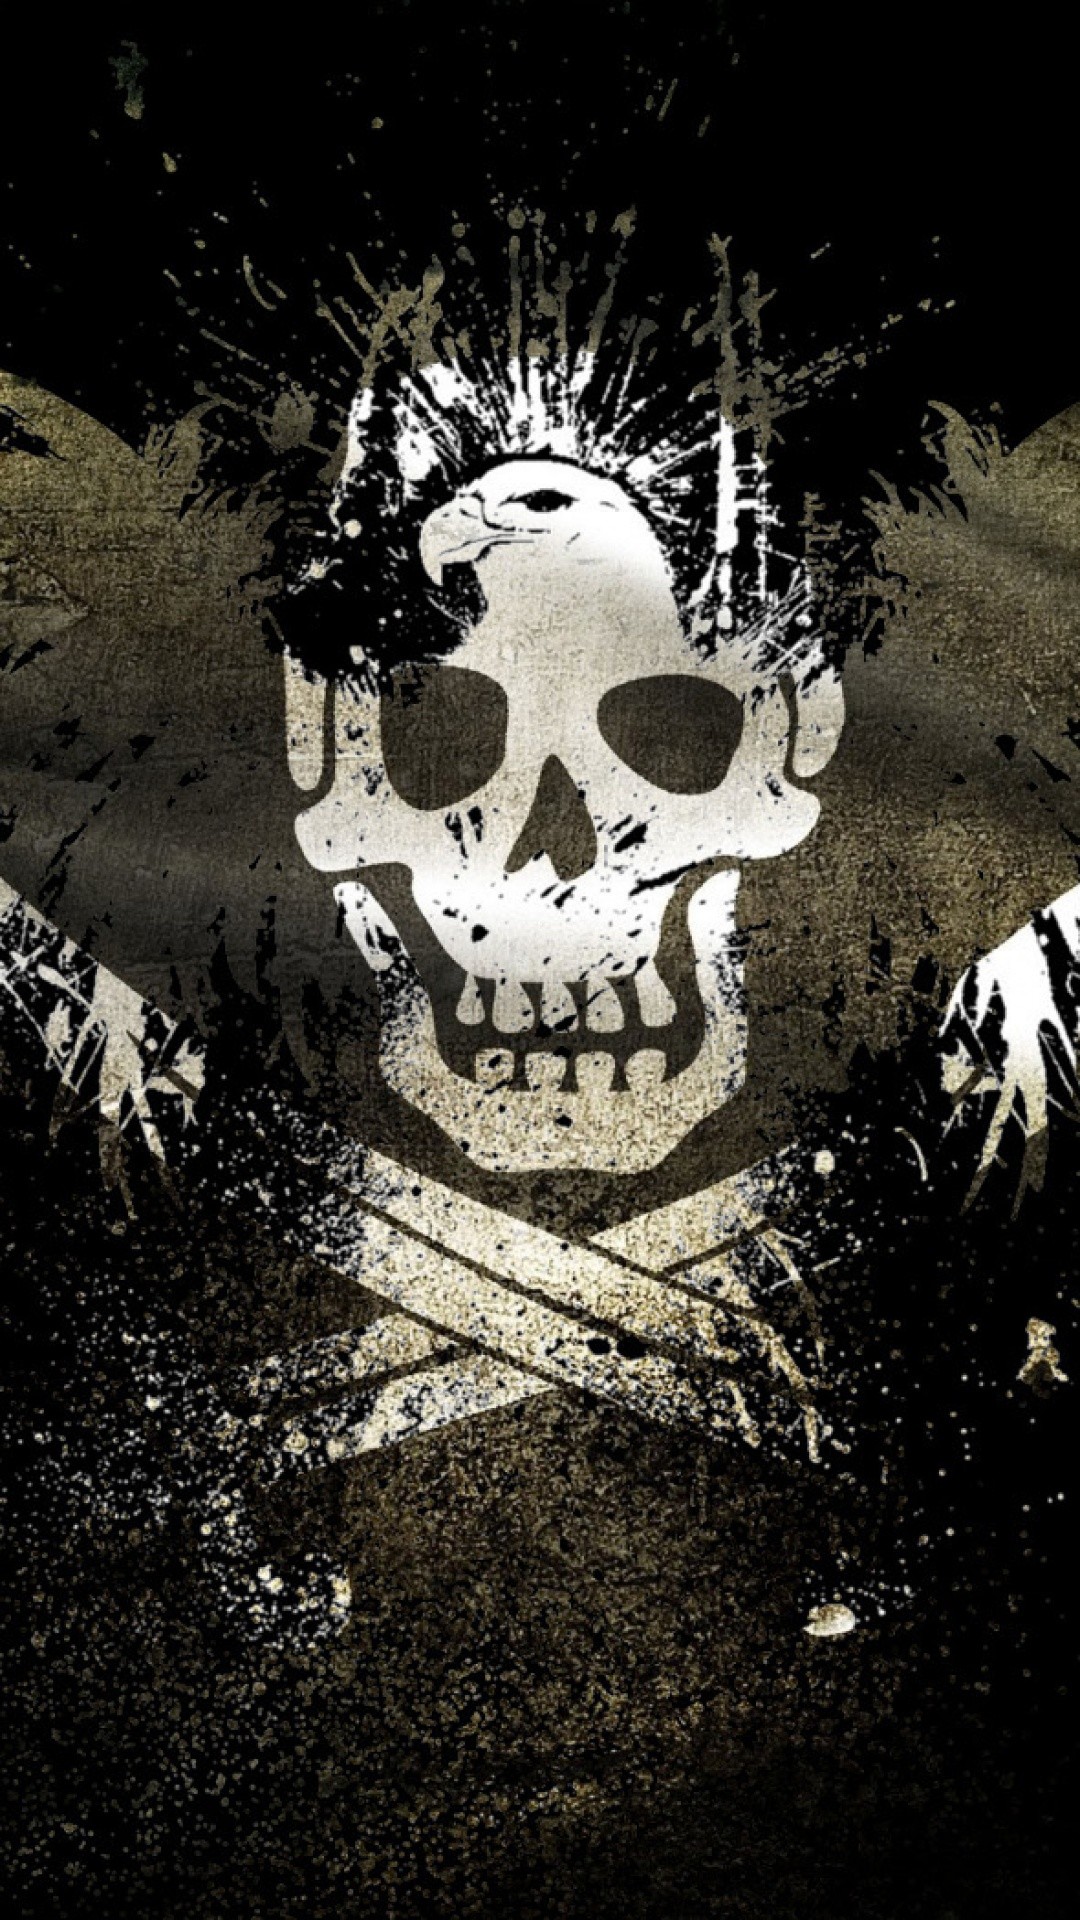 Pirate Skull Crossbones Wallpaper Pc Background, Picture Of Skull And  Crossbones Background Image And Wallpaper for Free Download